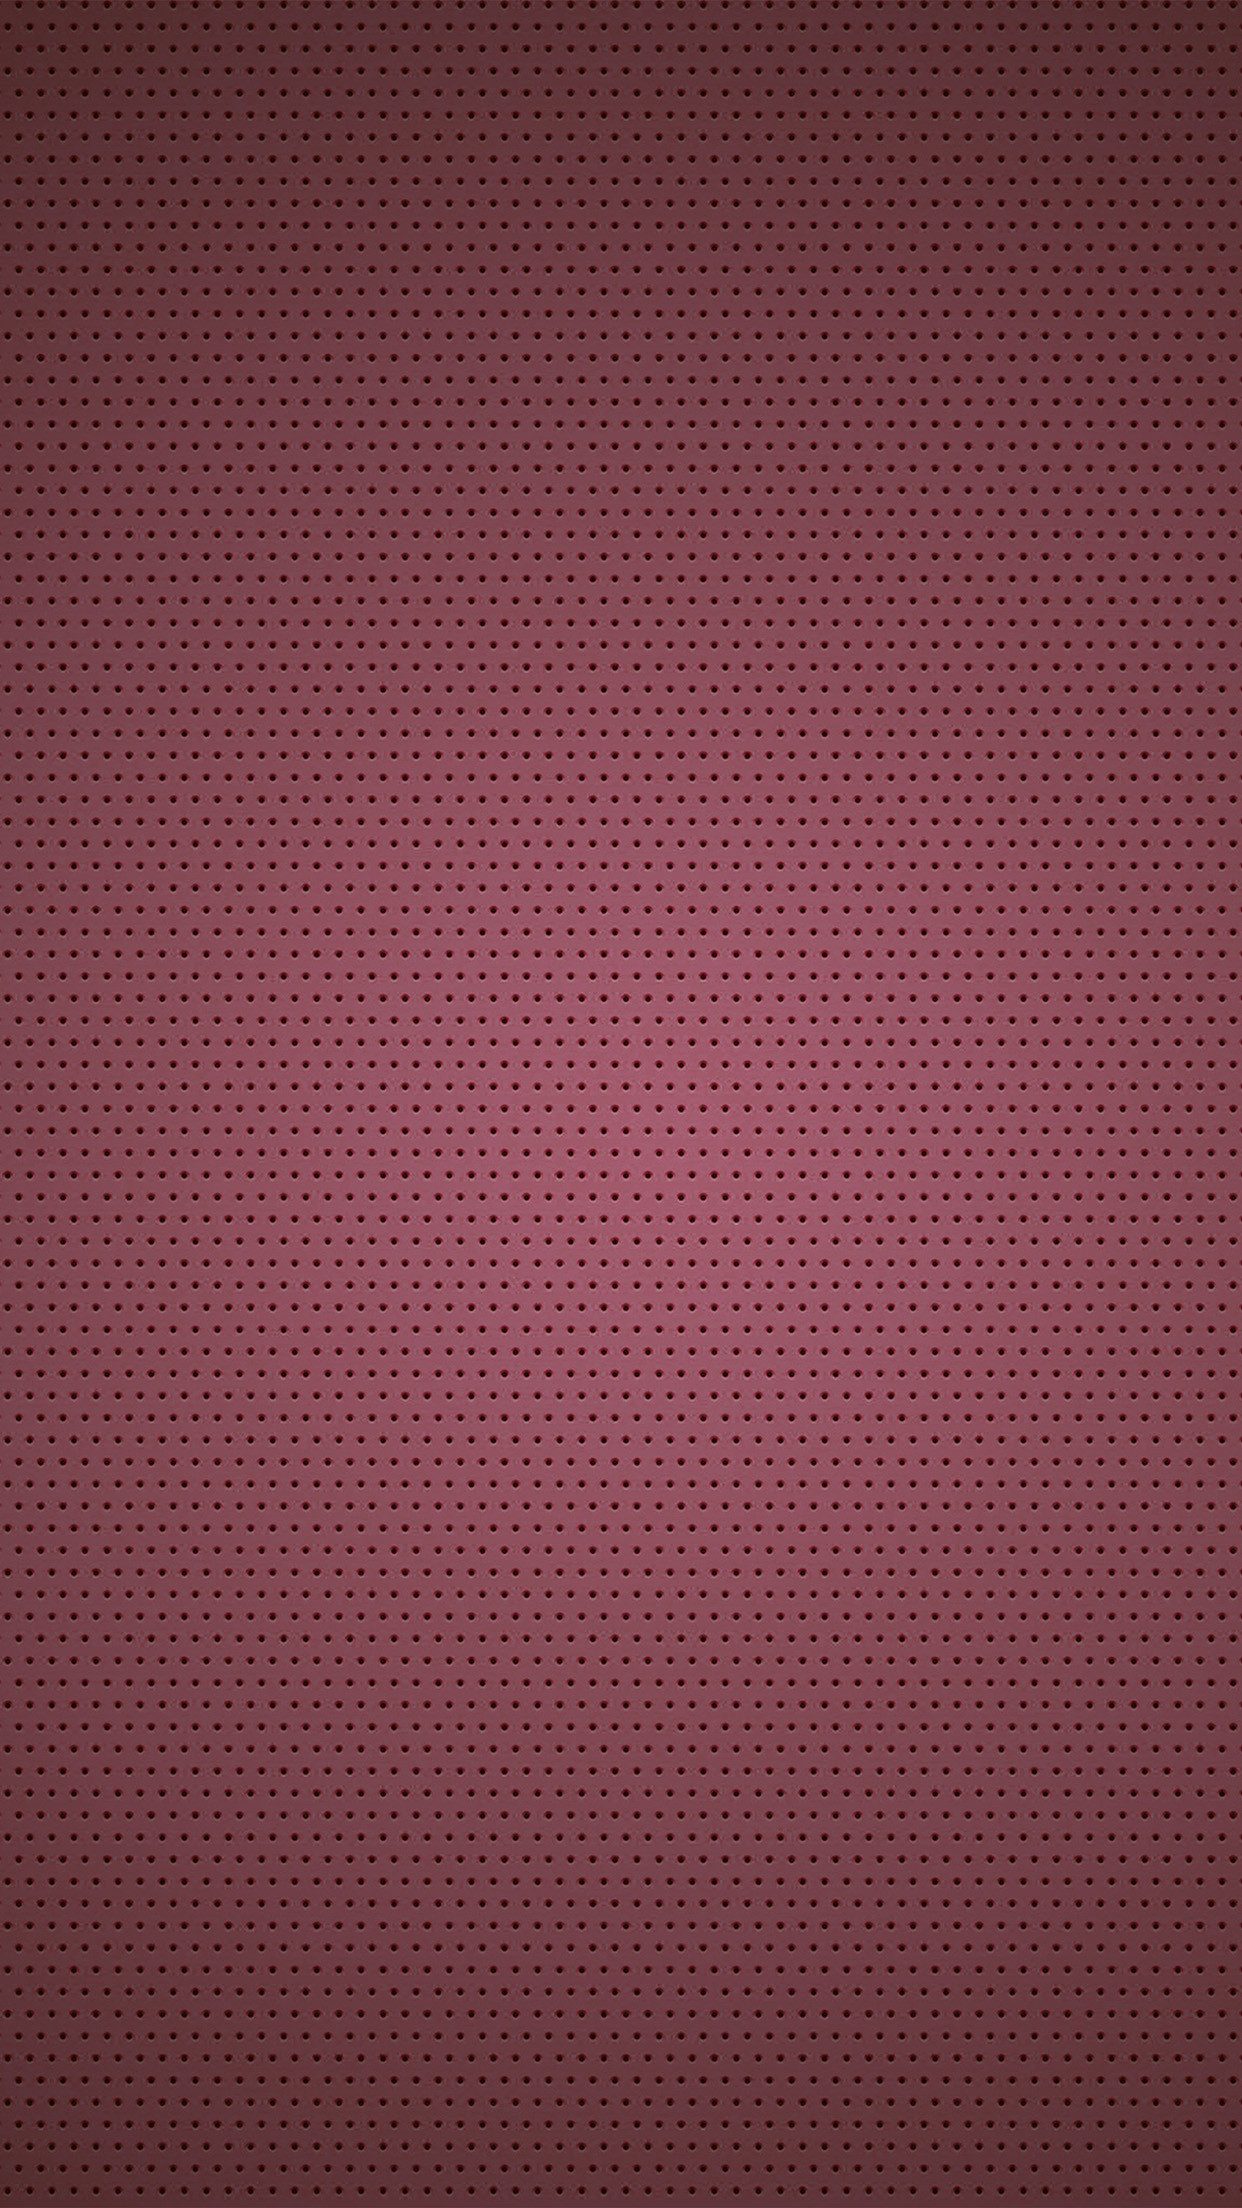 1242x2208 Purple Dots Perforated Texture iPhone 6+ HD Wallpaper ...